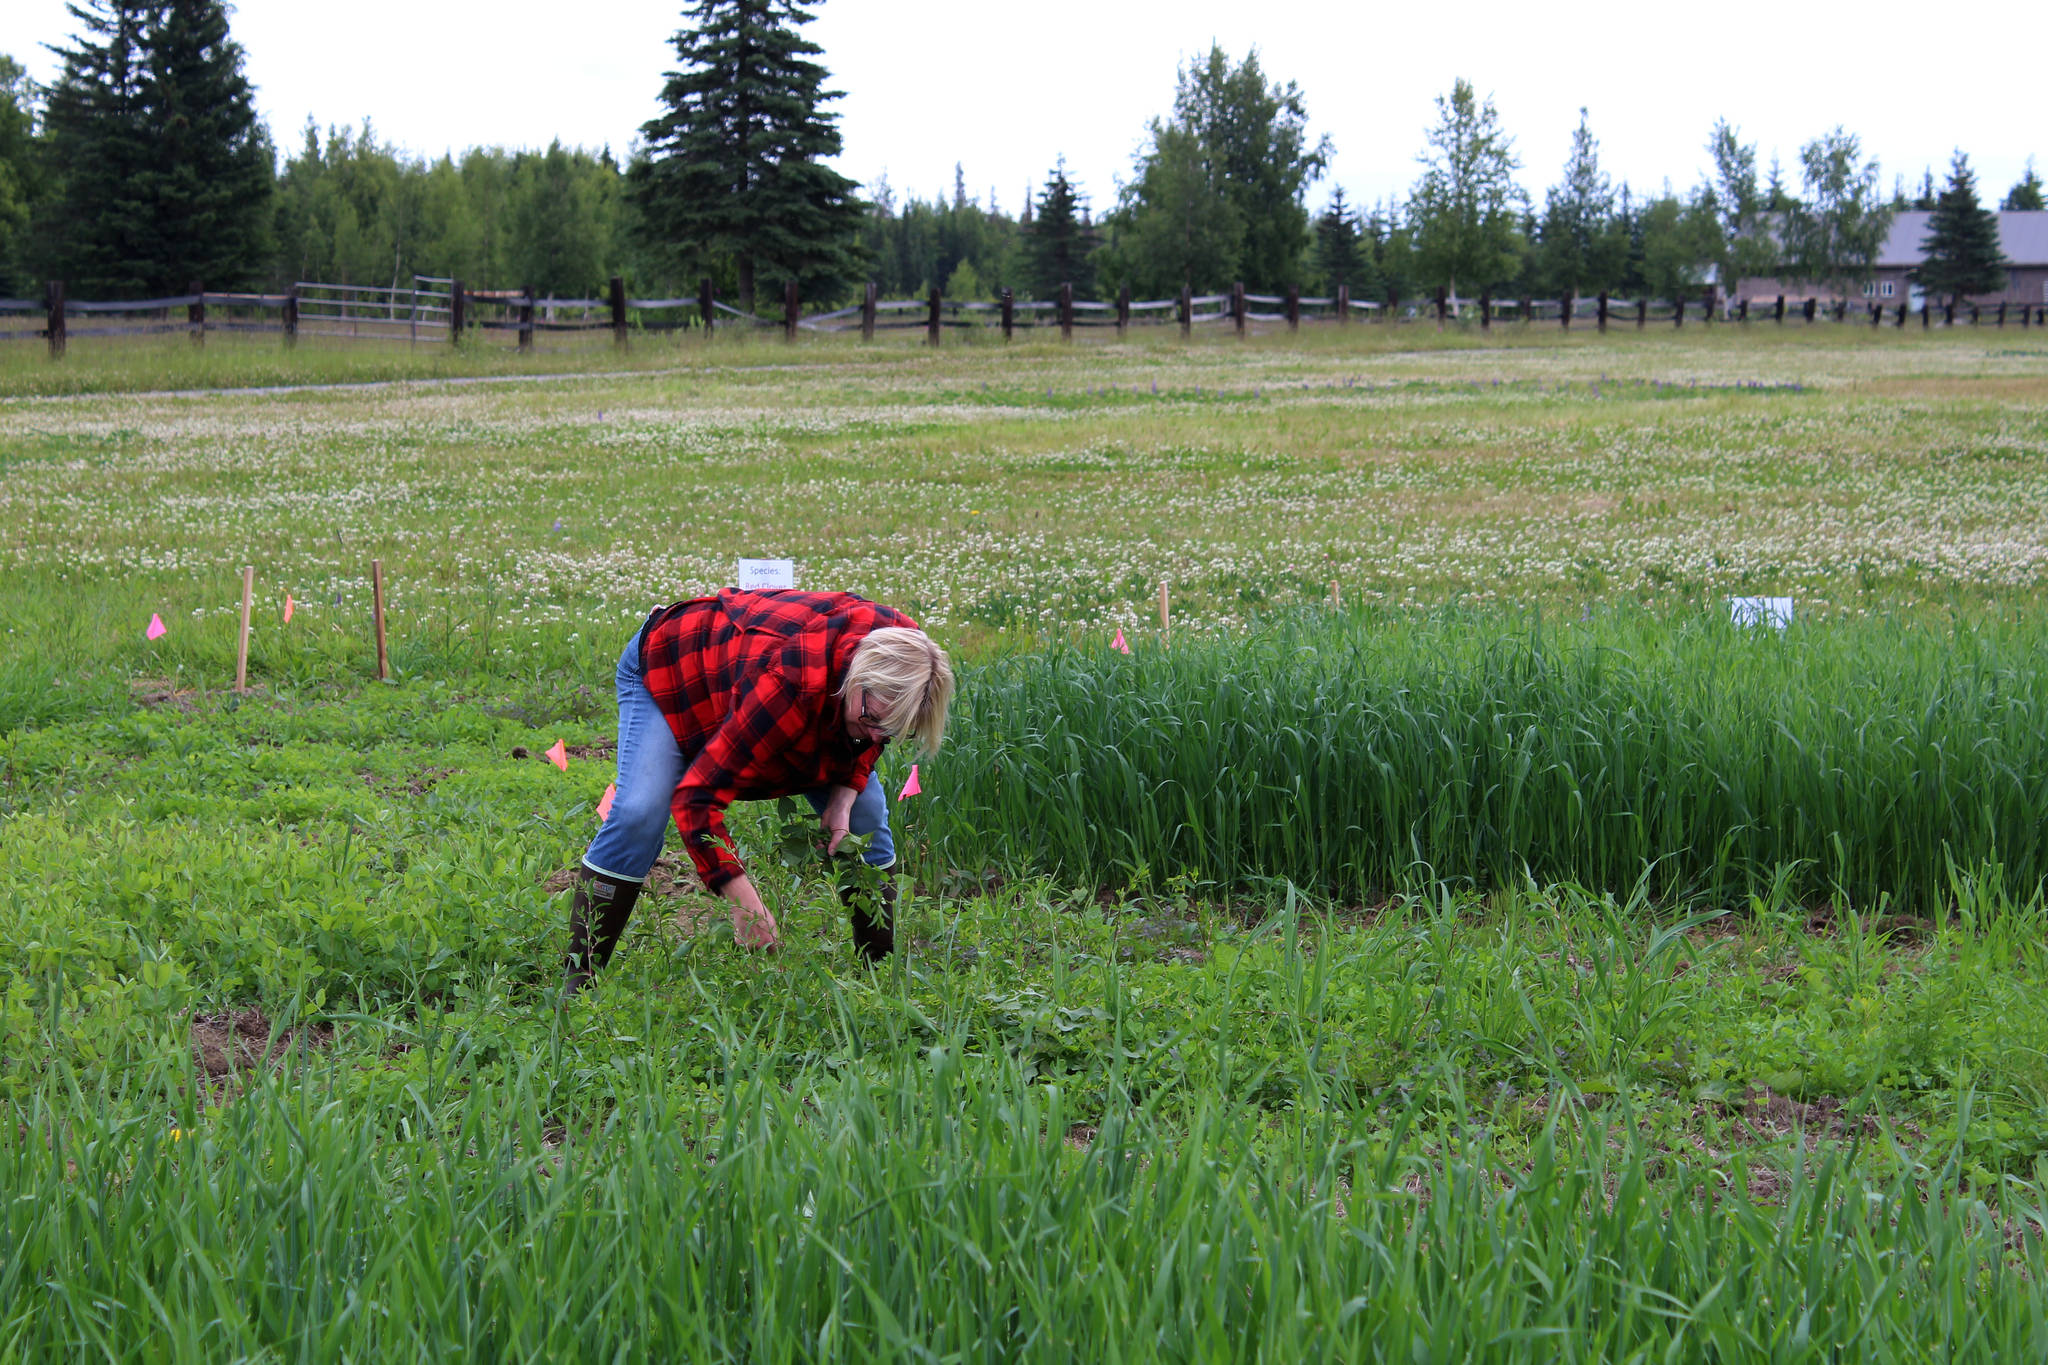 Kenai Soil Water Conservation District Manager Teri Diamond pulls weeds in a field near Sterling, Alaska on Friday, July 30, 2021. (Ashlyn O’Hara/Peninsula Clarion)